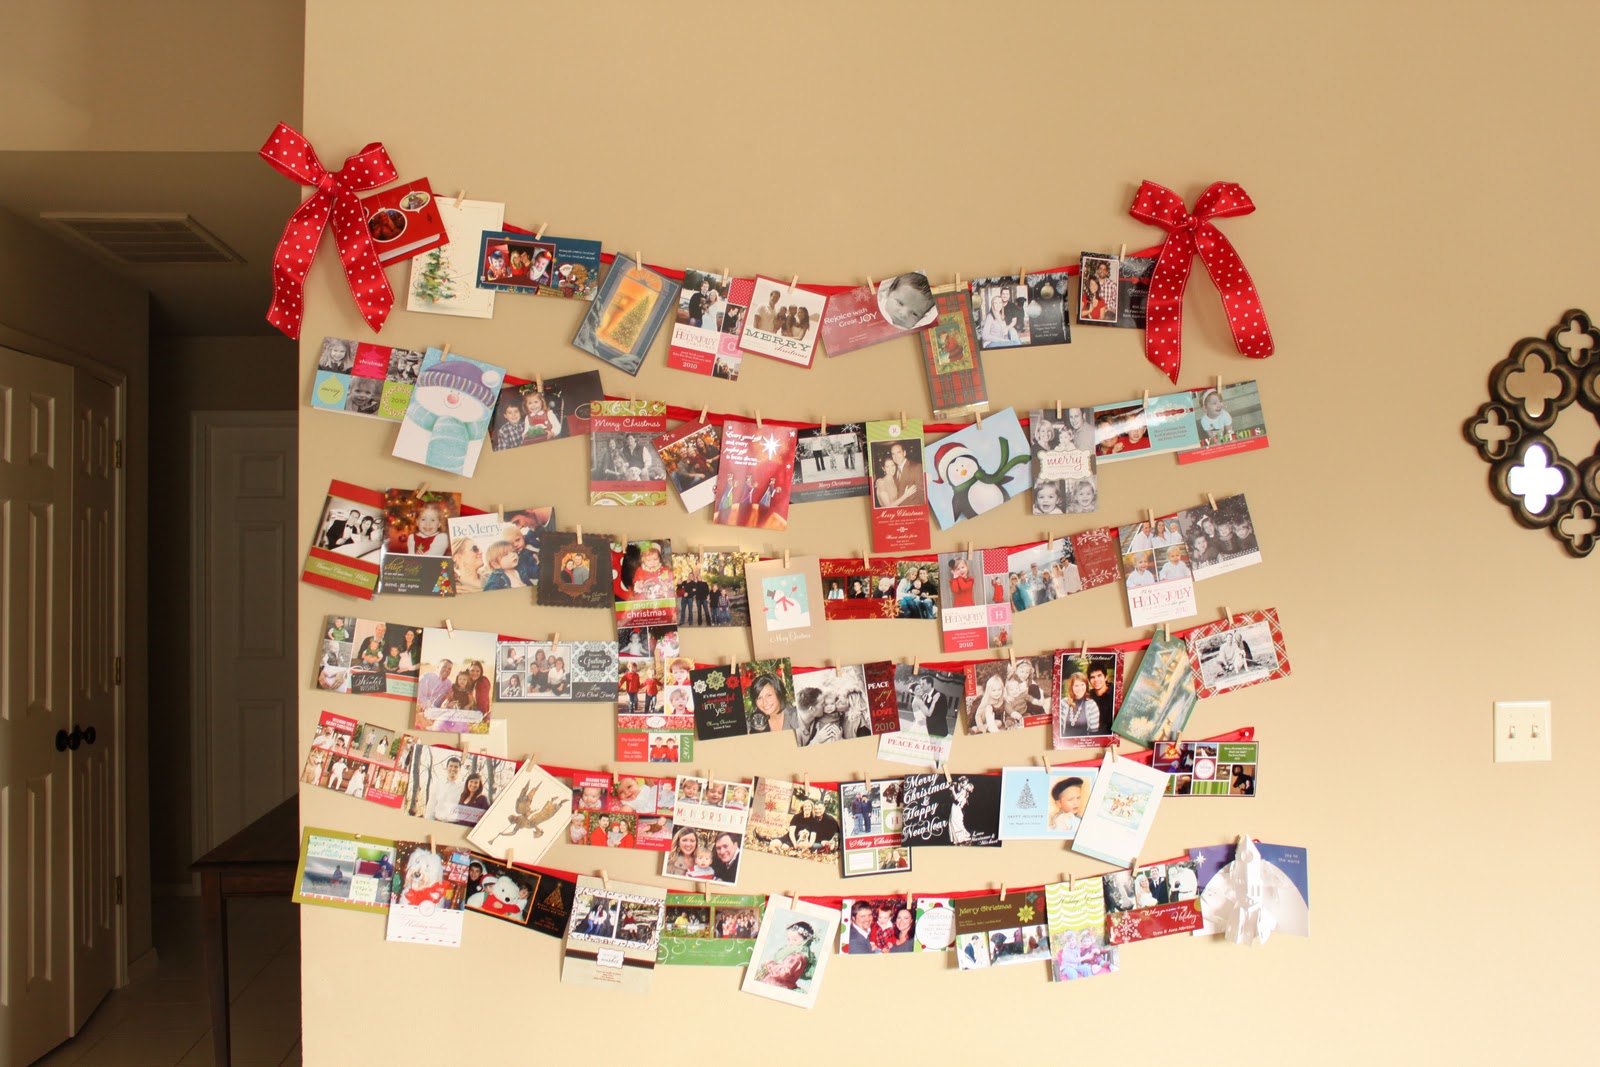 Hanging Holiday Cards - In this Wonderful Life